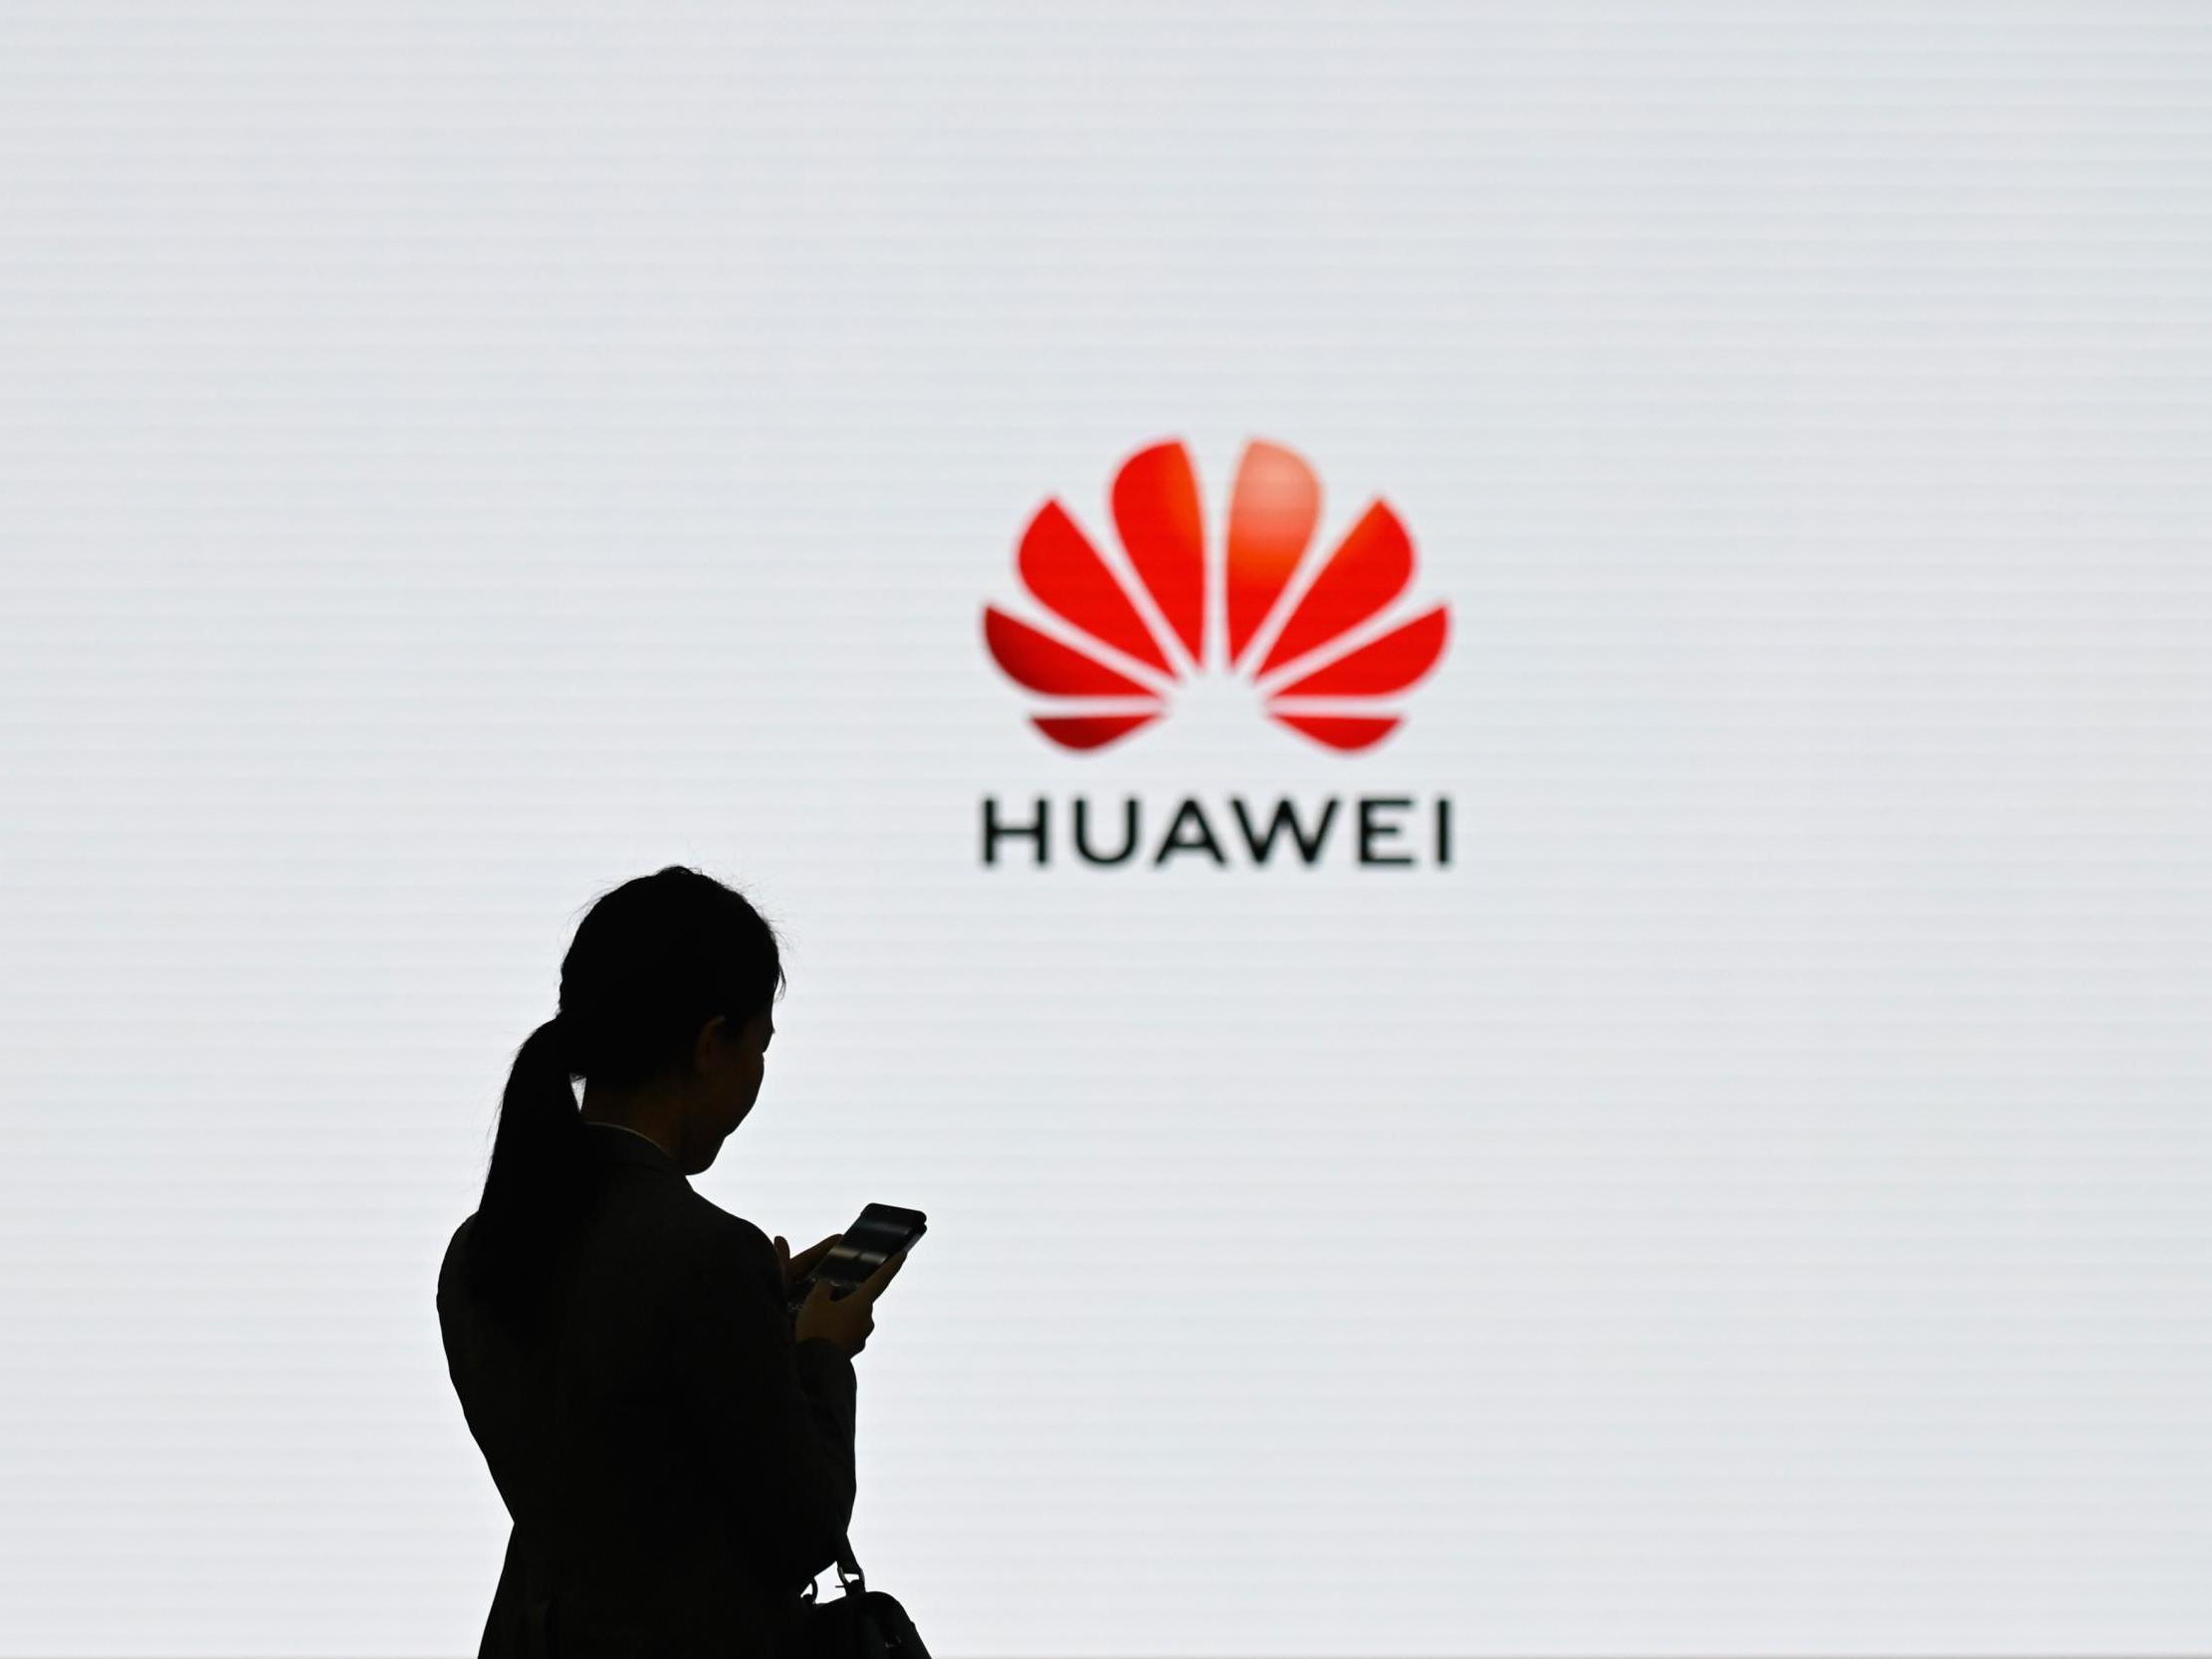 Officials are allegedly crafting proposals to prevent new Huawei equipment being installed in the 5G network